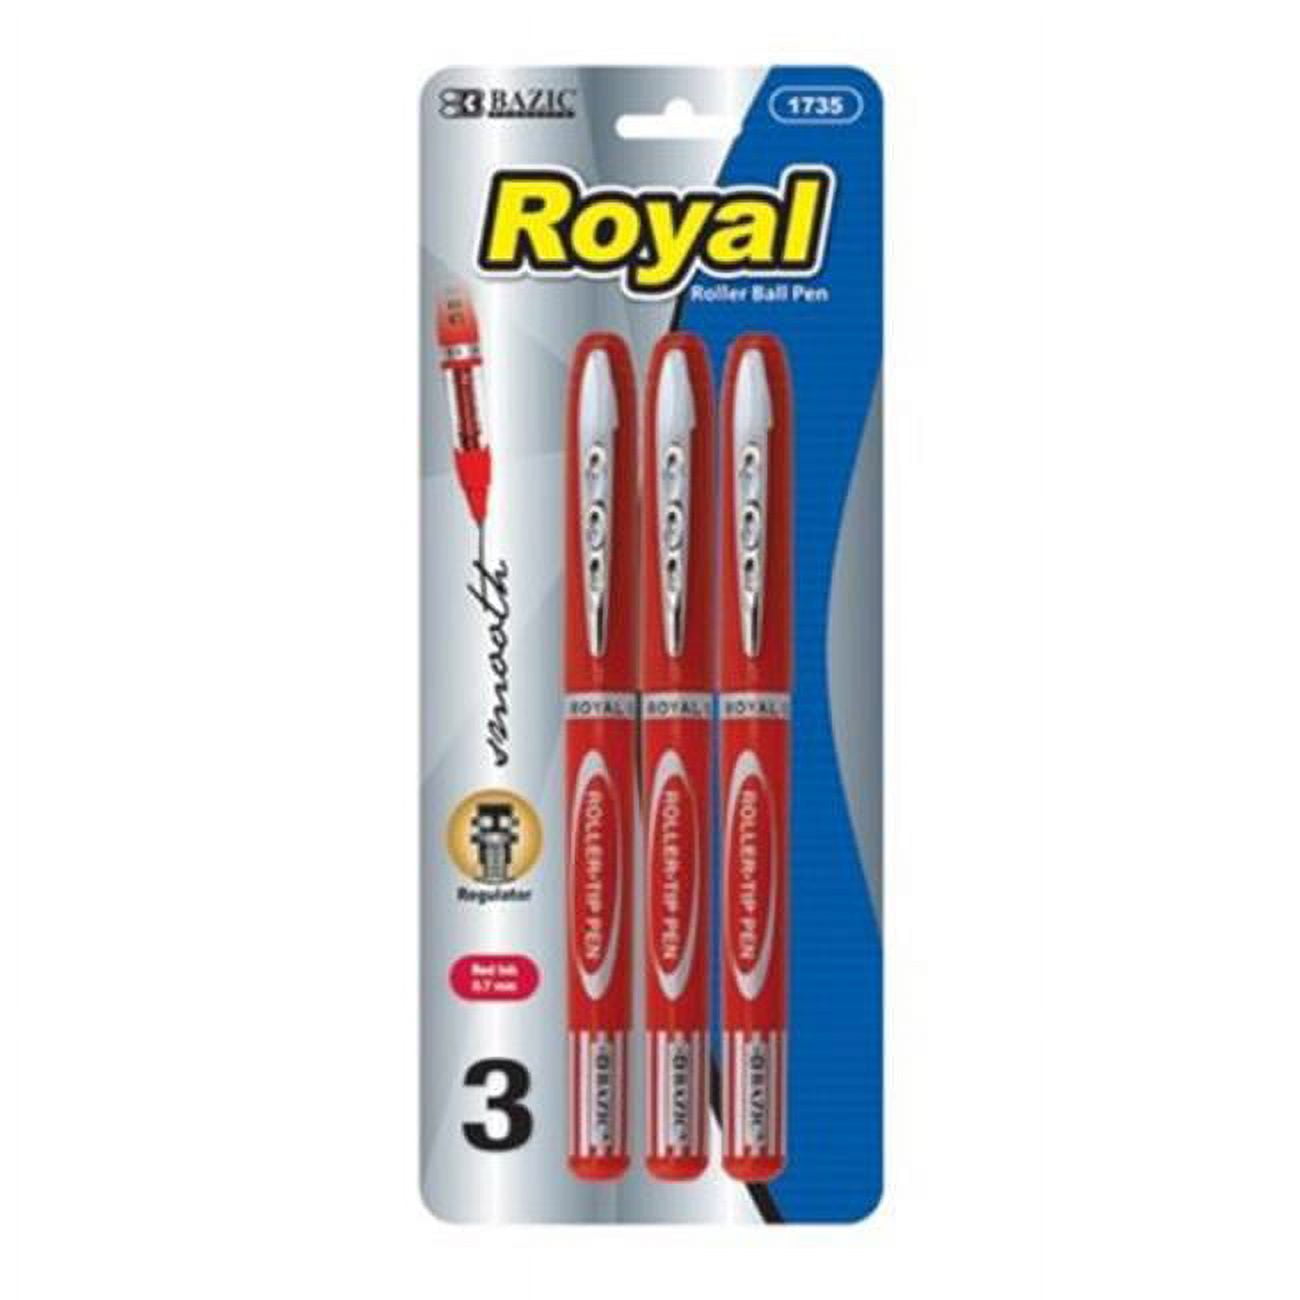 Picture of Bazic 1721 Royal Assorted Color Rollerball Pen (3/Pack) Case of 24